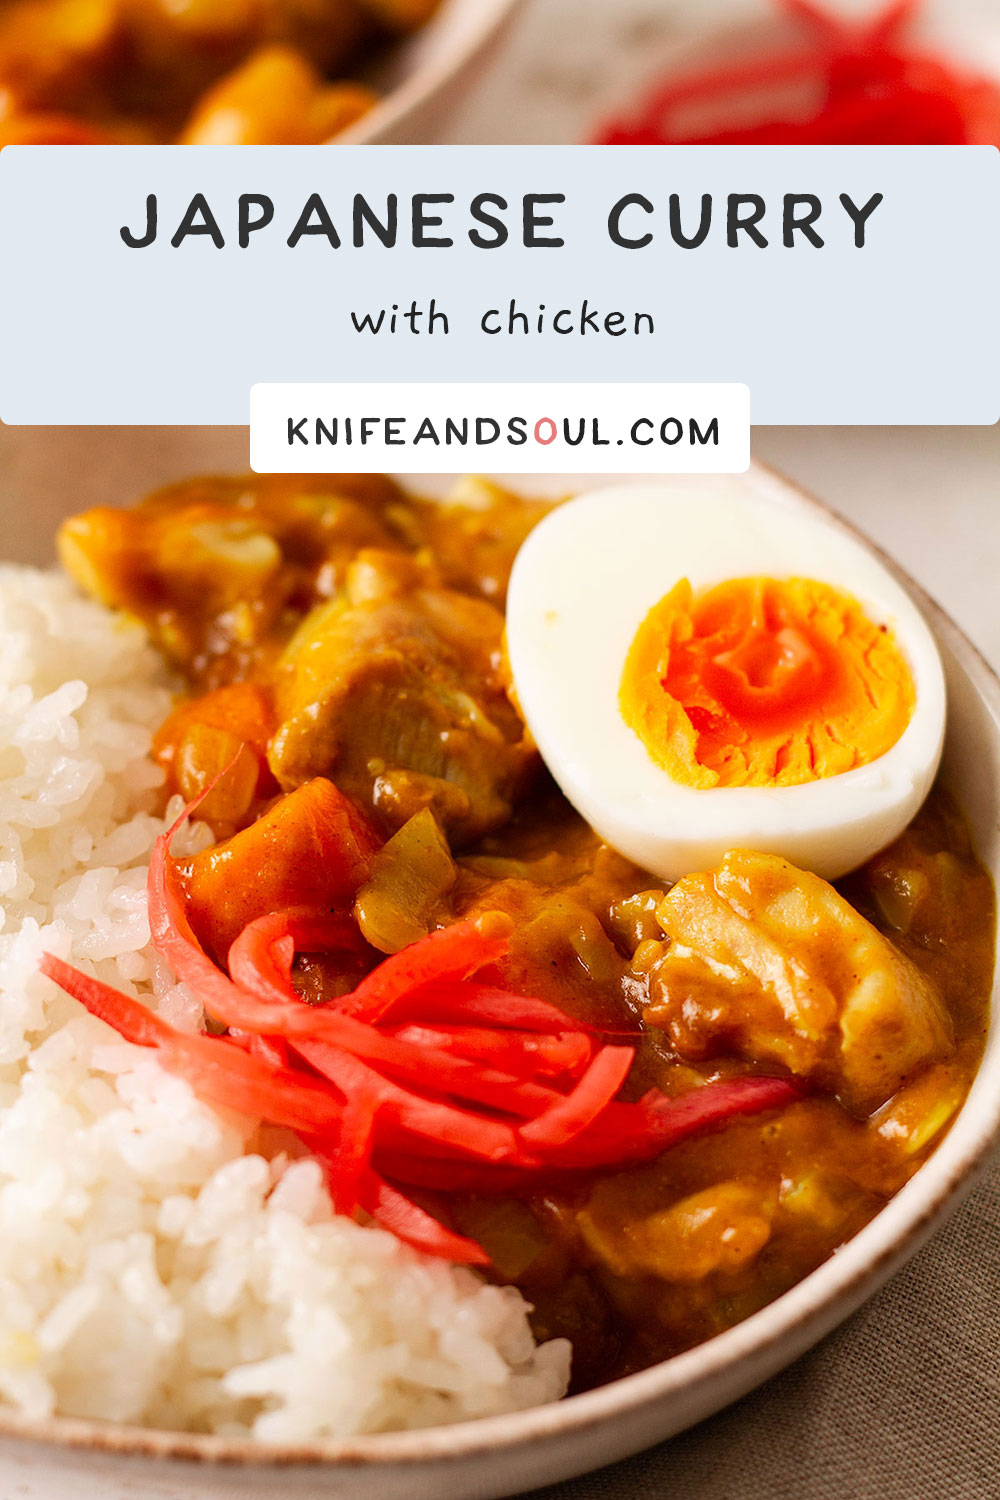 Japanese Curry using S&B Golden Curry - Knife and Soul